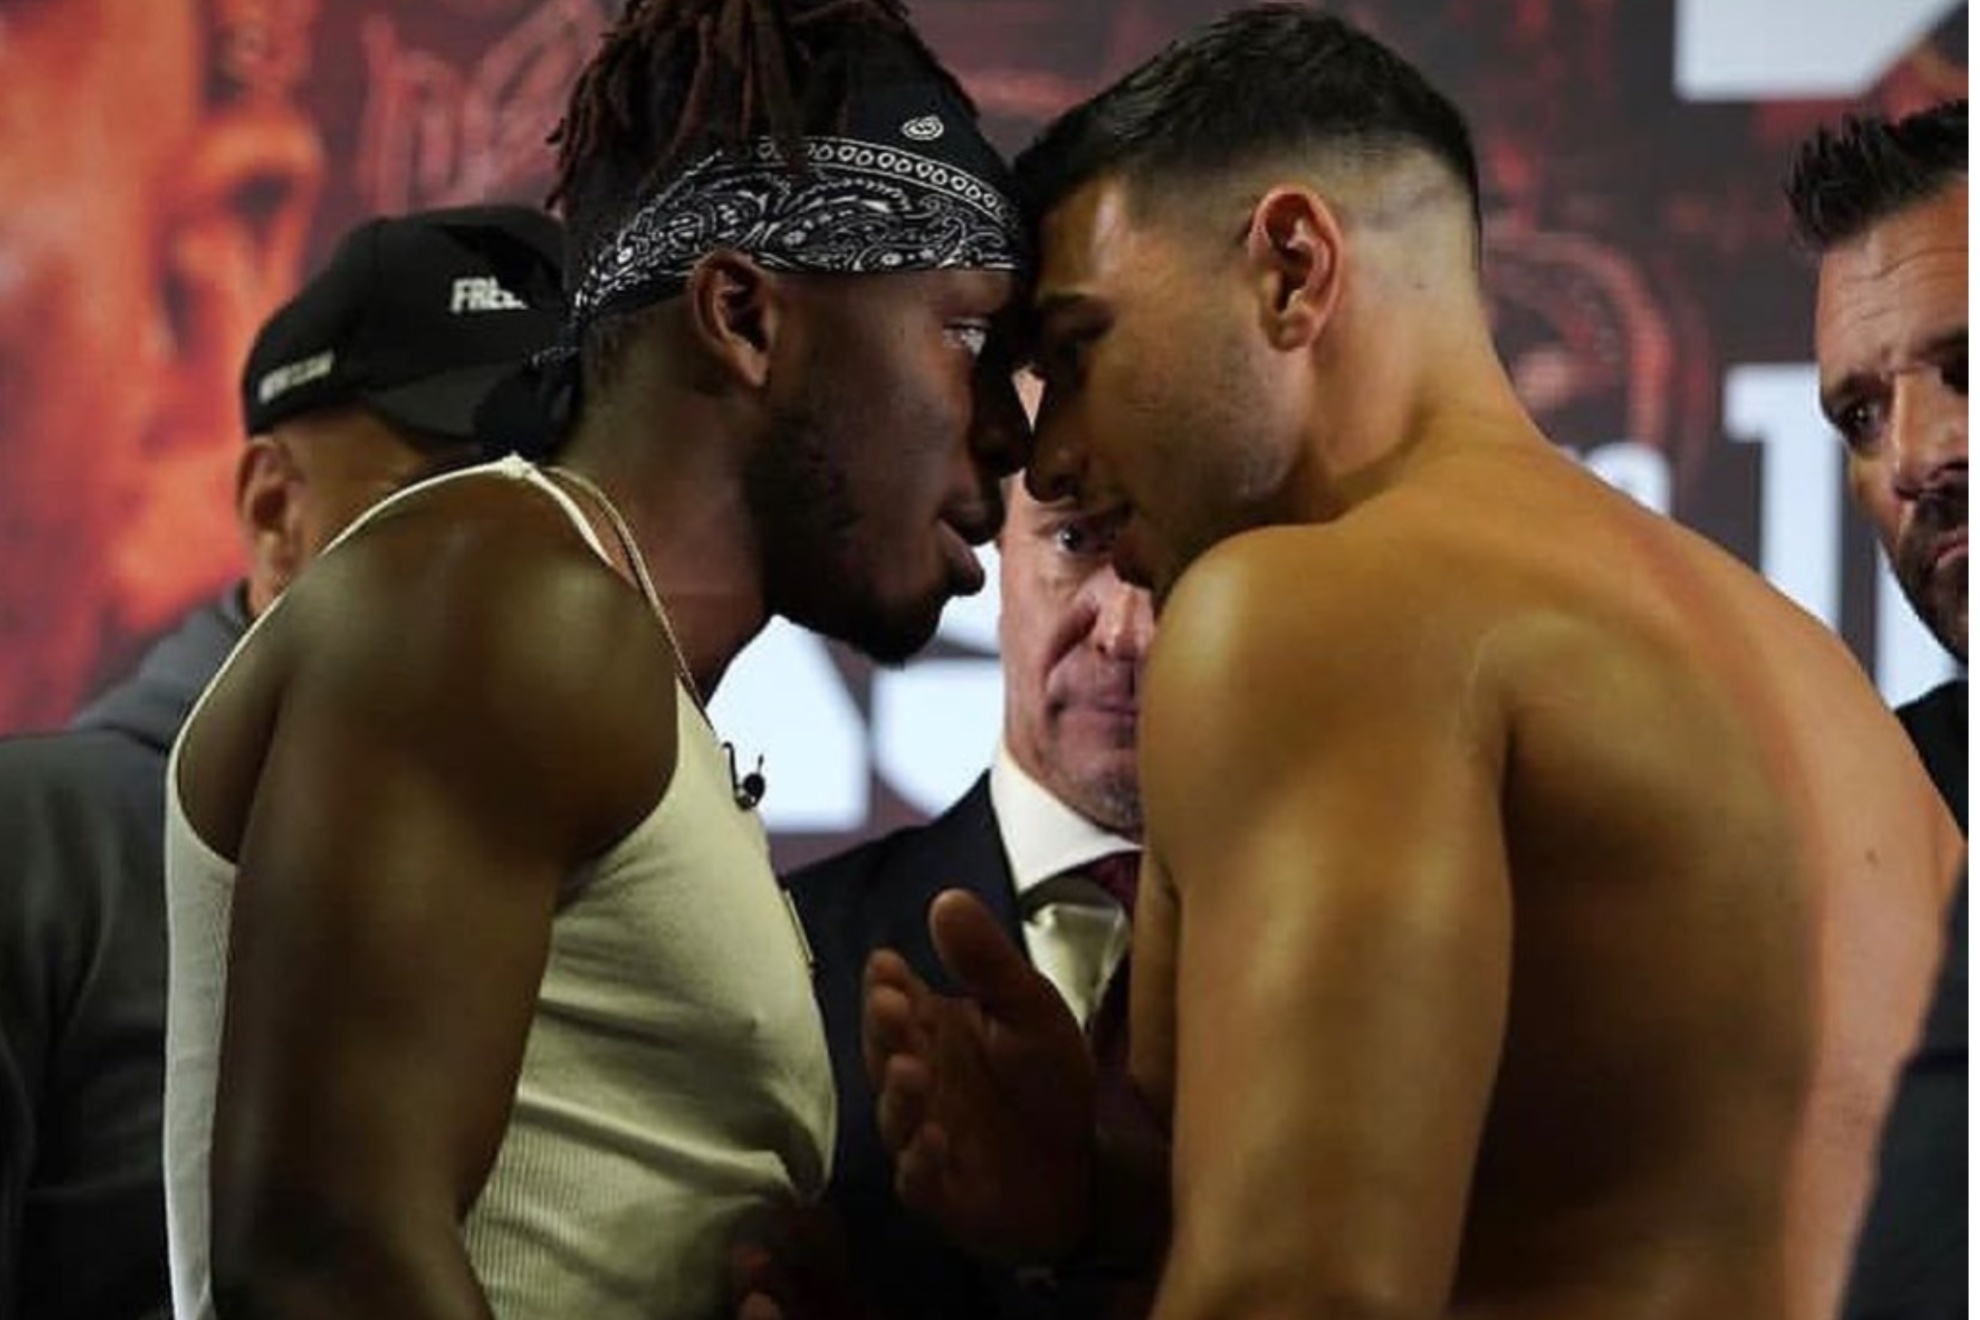 KSI trolled Tommy Fury on social media ahead of their fight